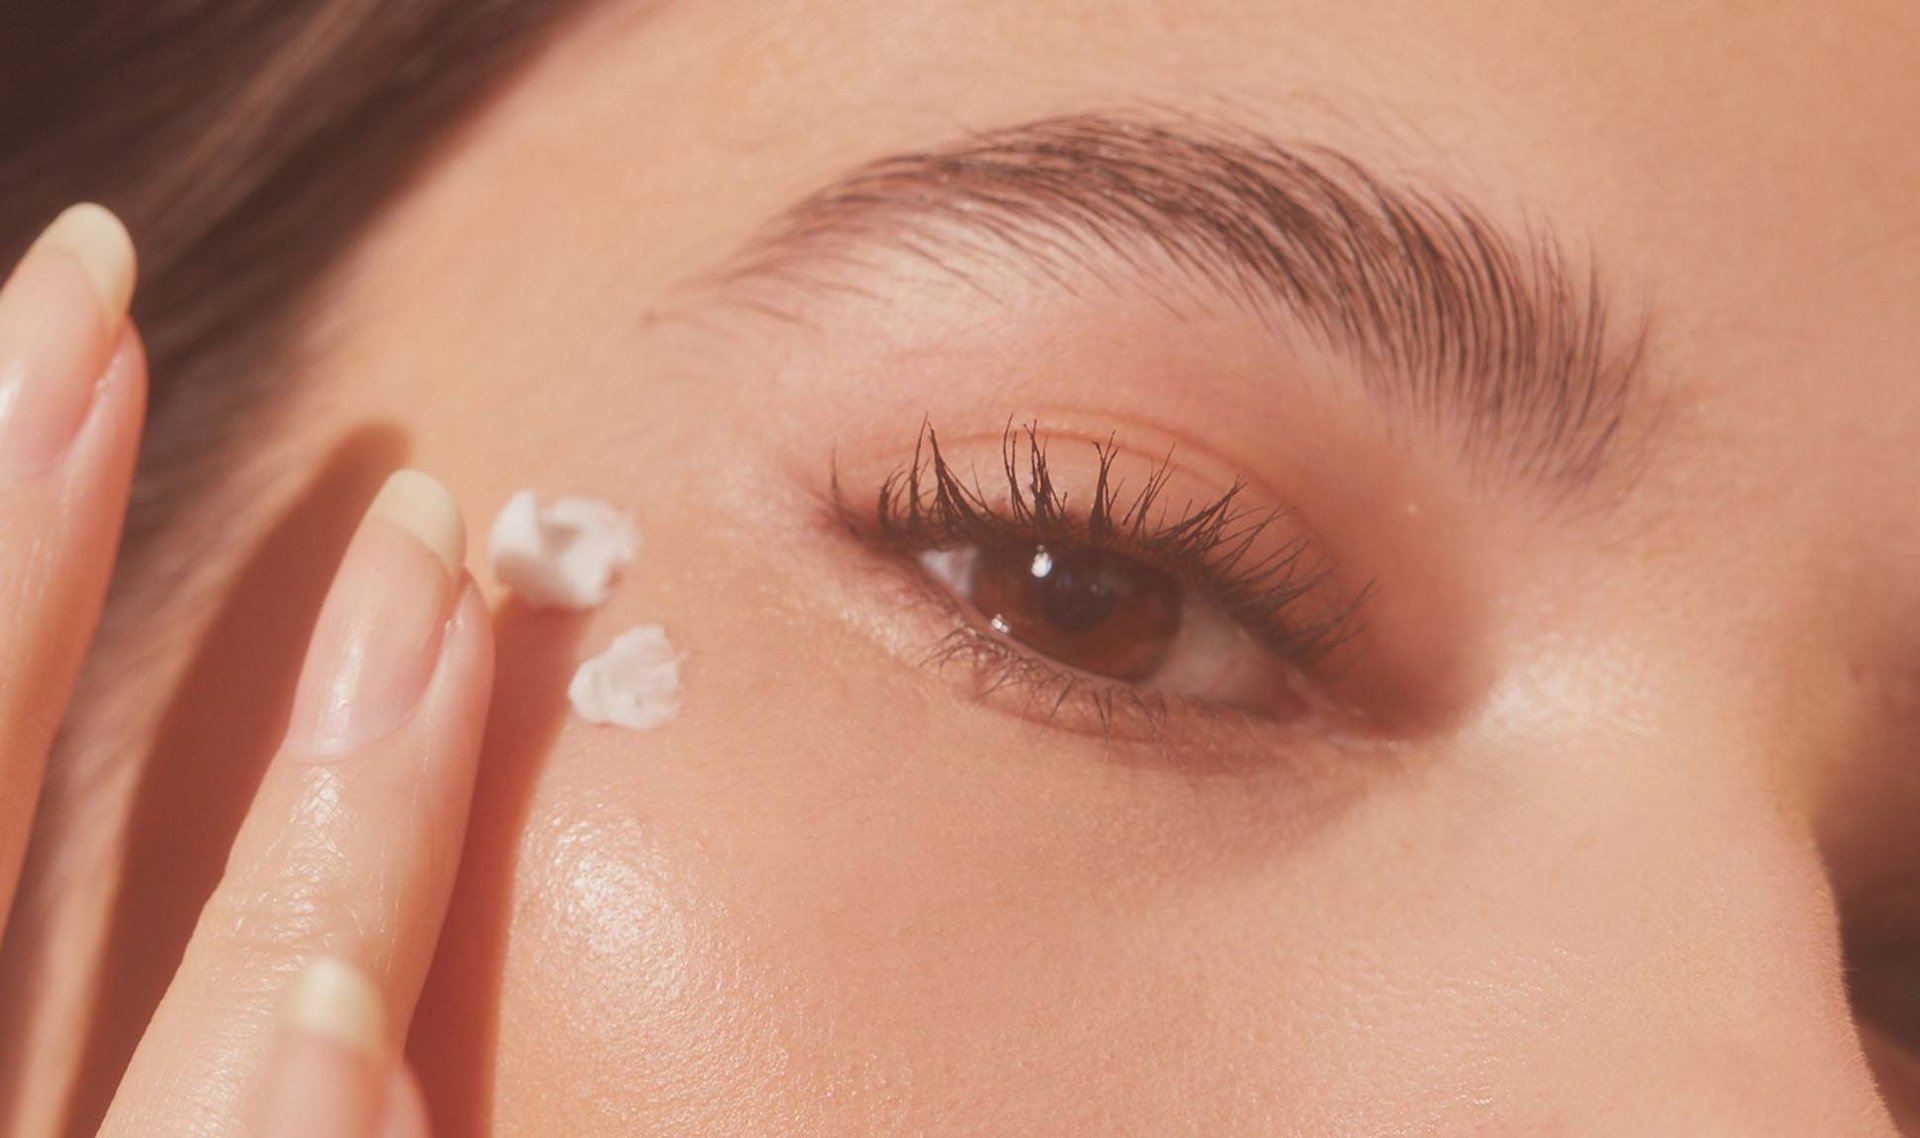 Skincare Rules to Follow if You Wear Contacts, According to an Ophthalmologist